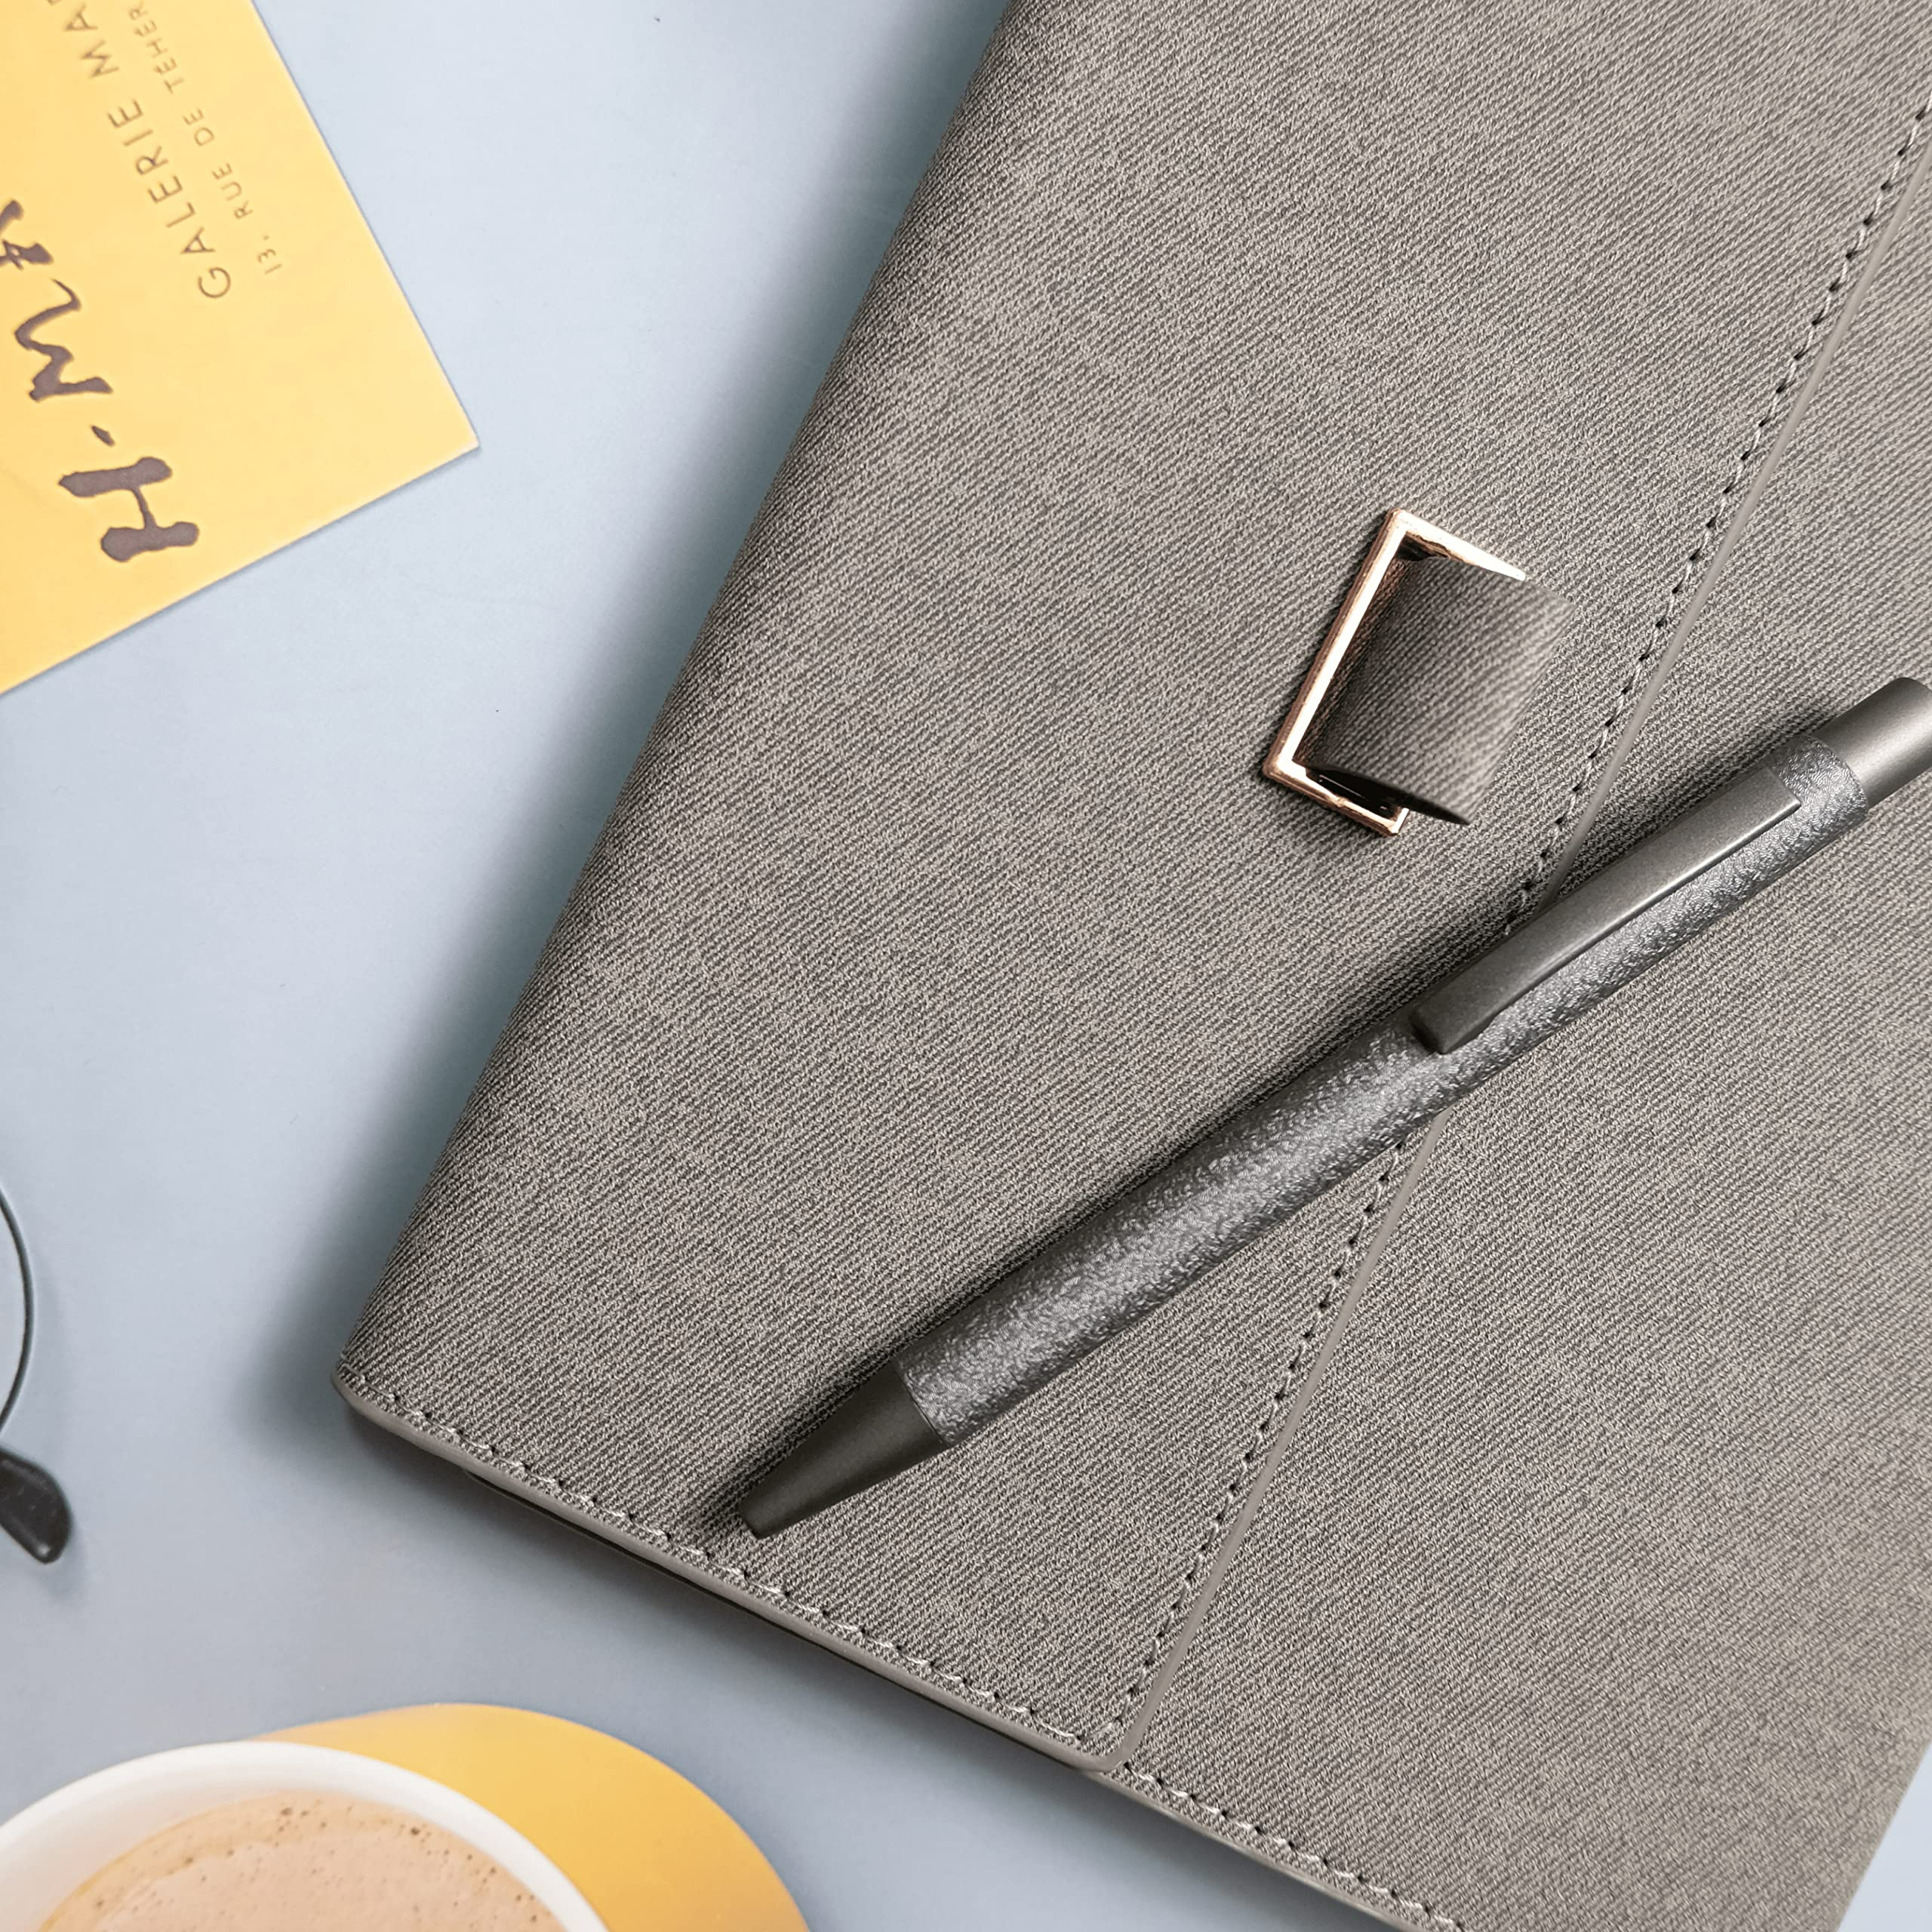 Durdharsha BIBELOT Elegant Fossil Gray Thermal Cover Diary with Pen Holder, Pen, and Organizer